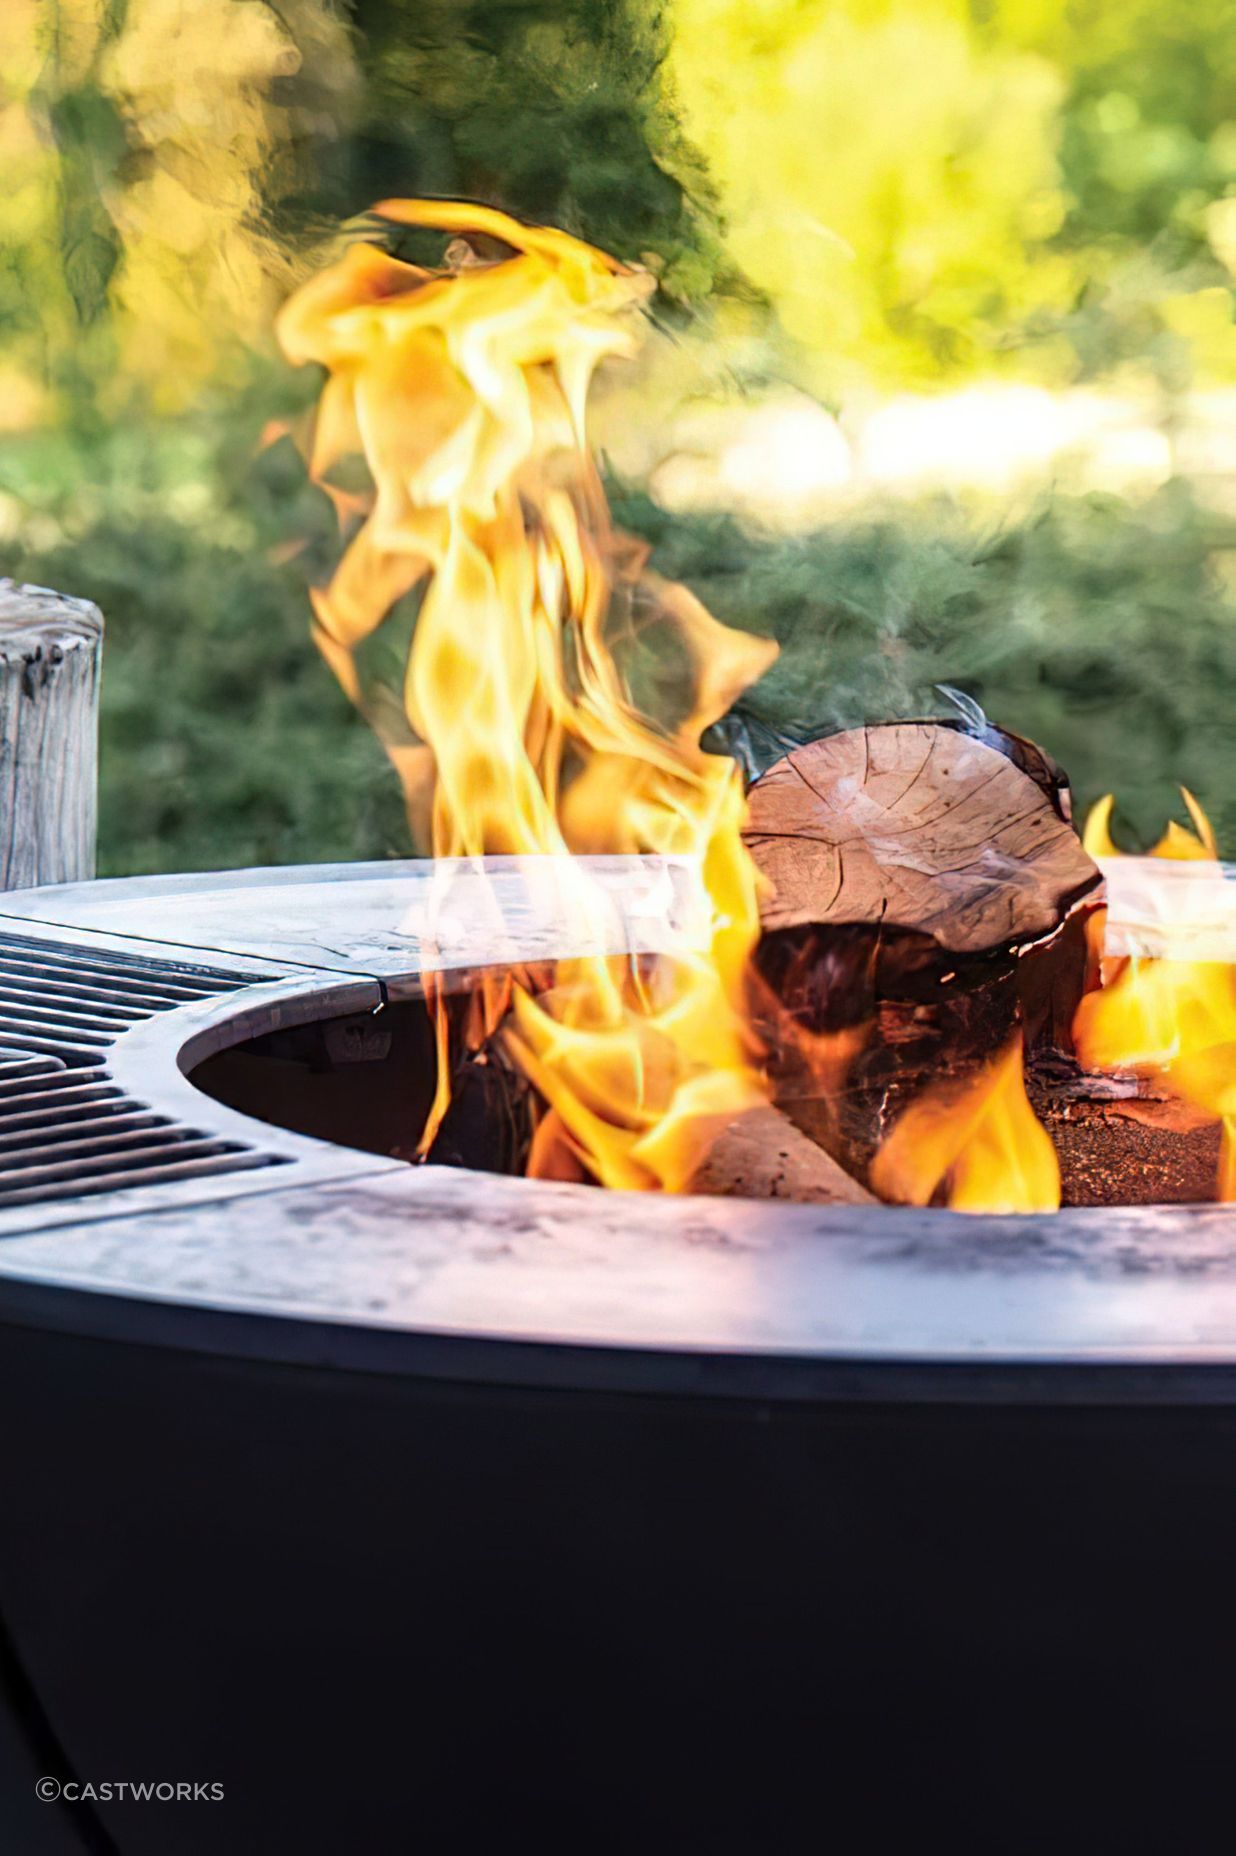 This outdoor fire pit works well as a functional grill.